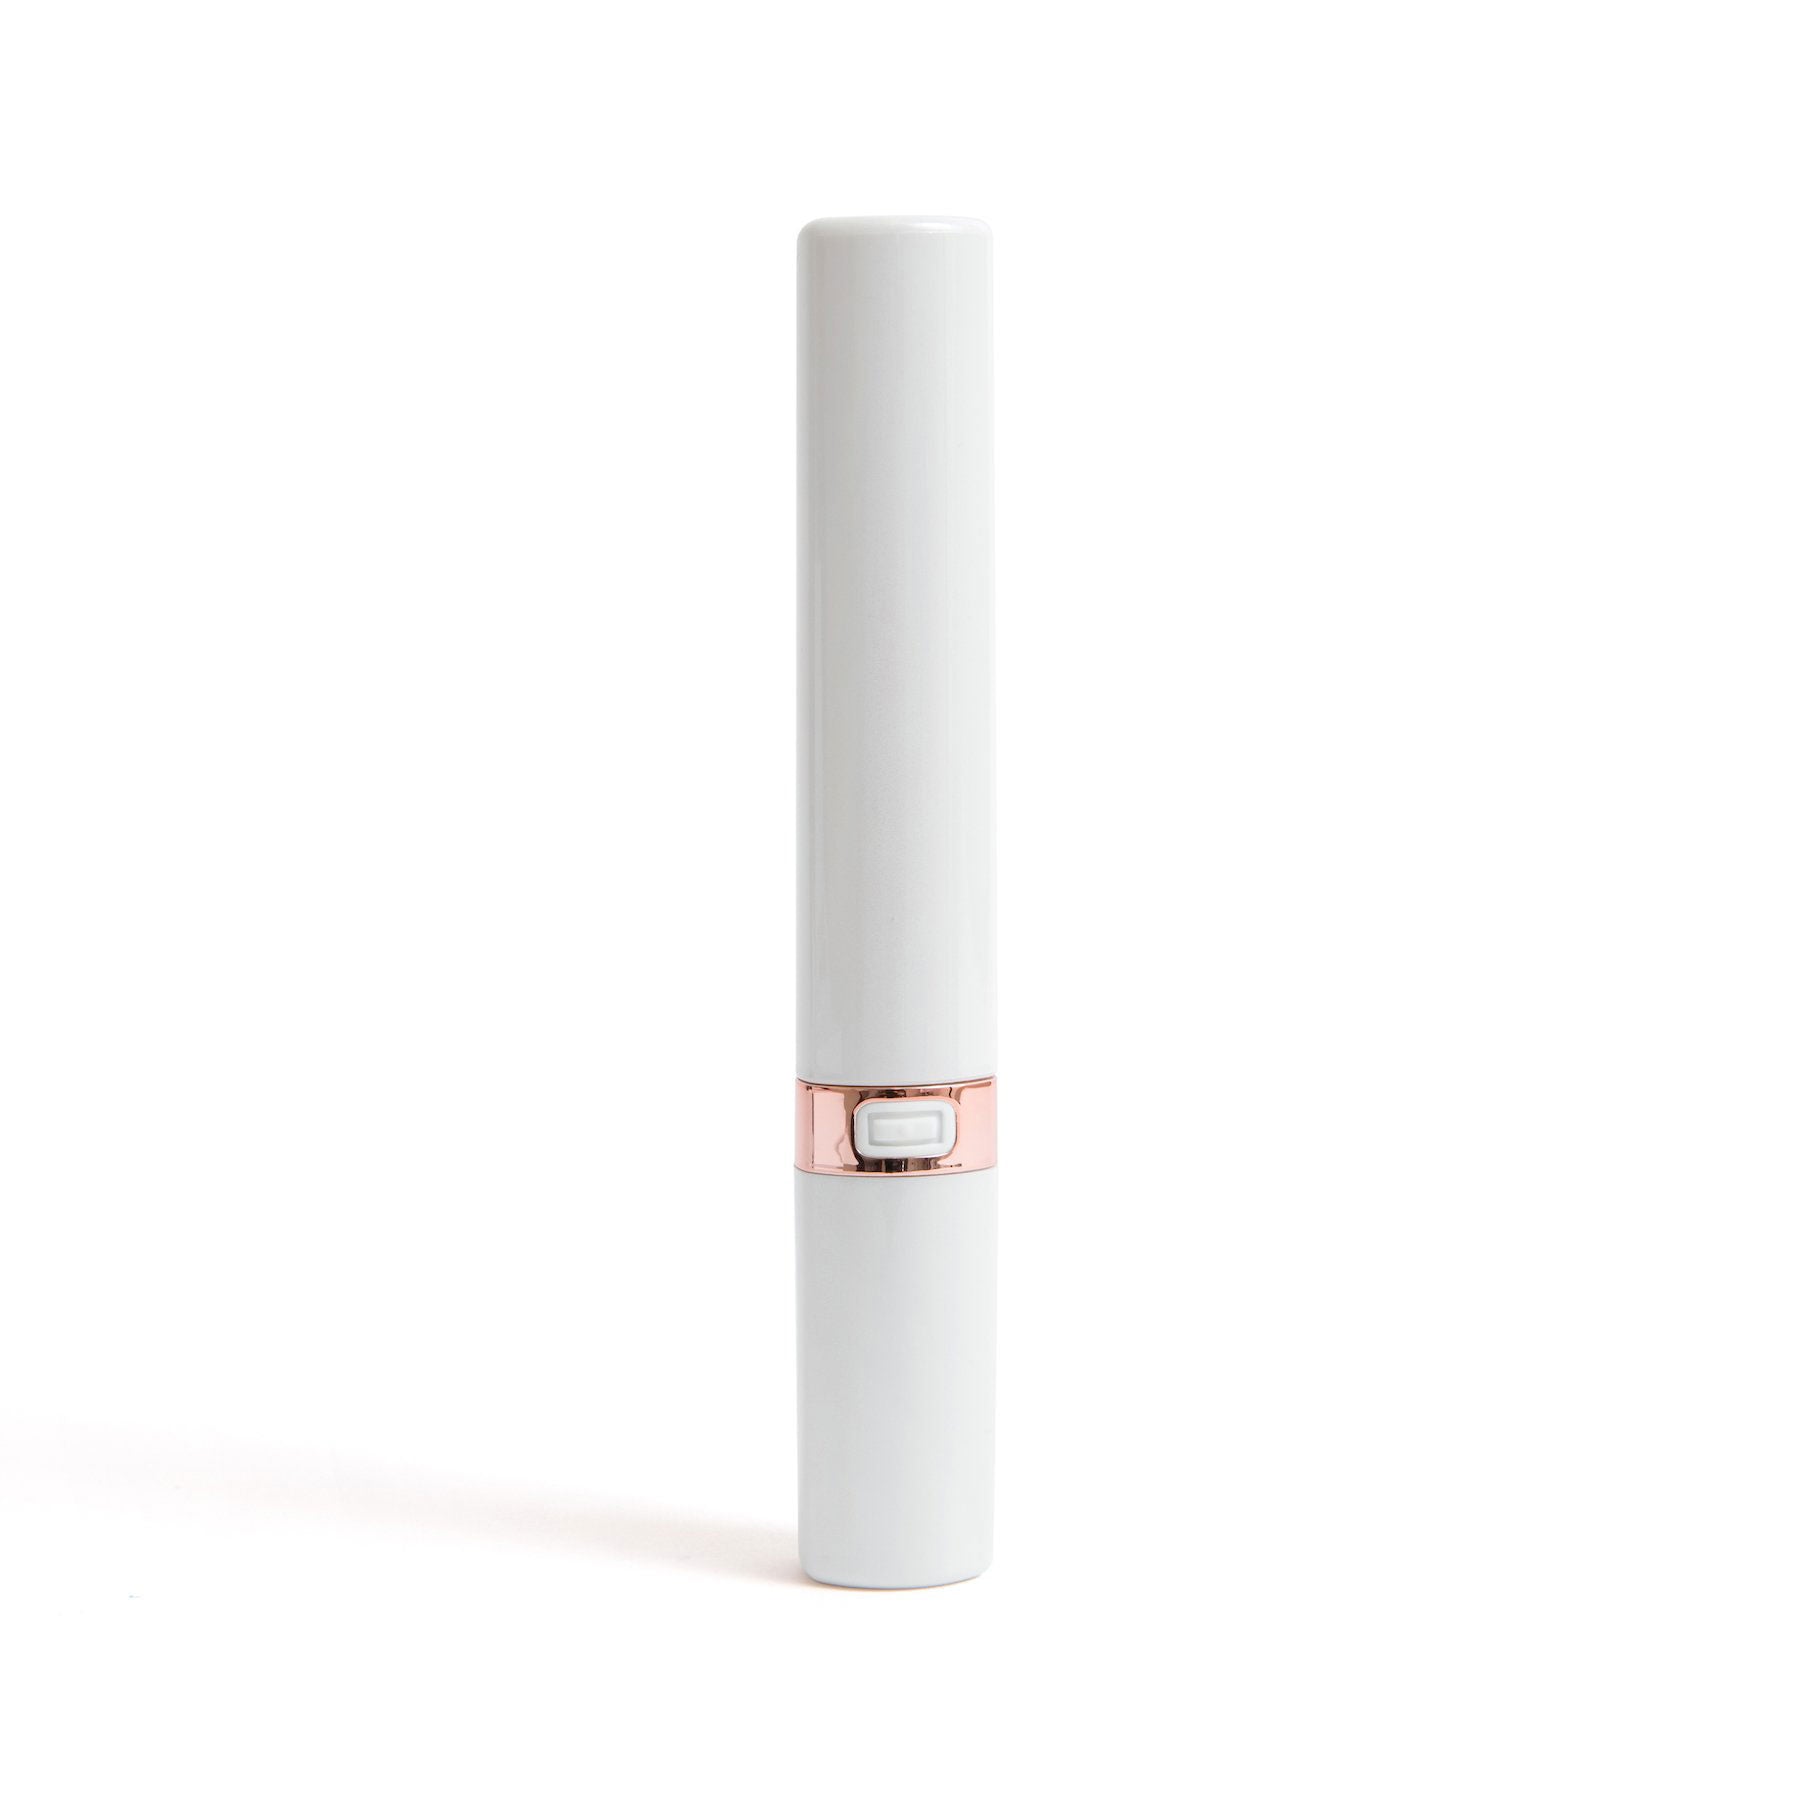 Cache 20 Function Vibe - White BT-W46WH